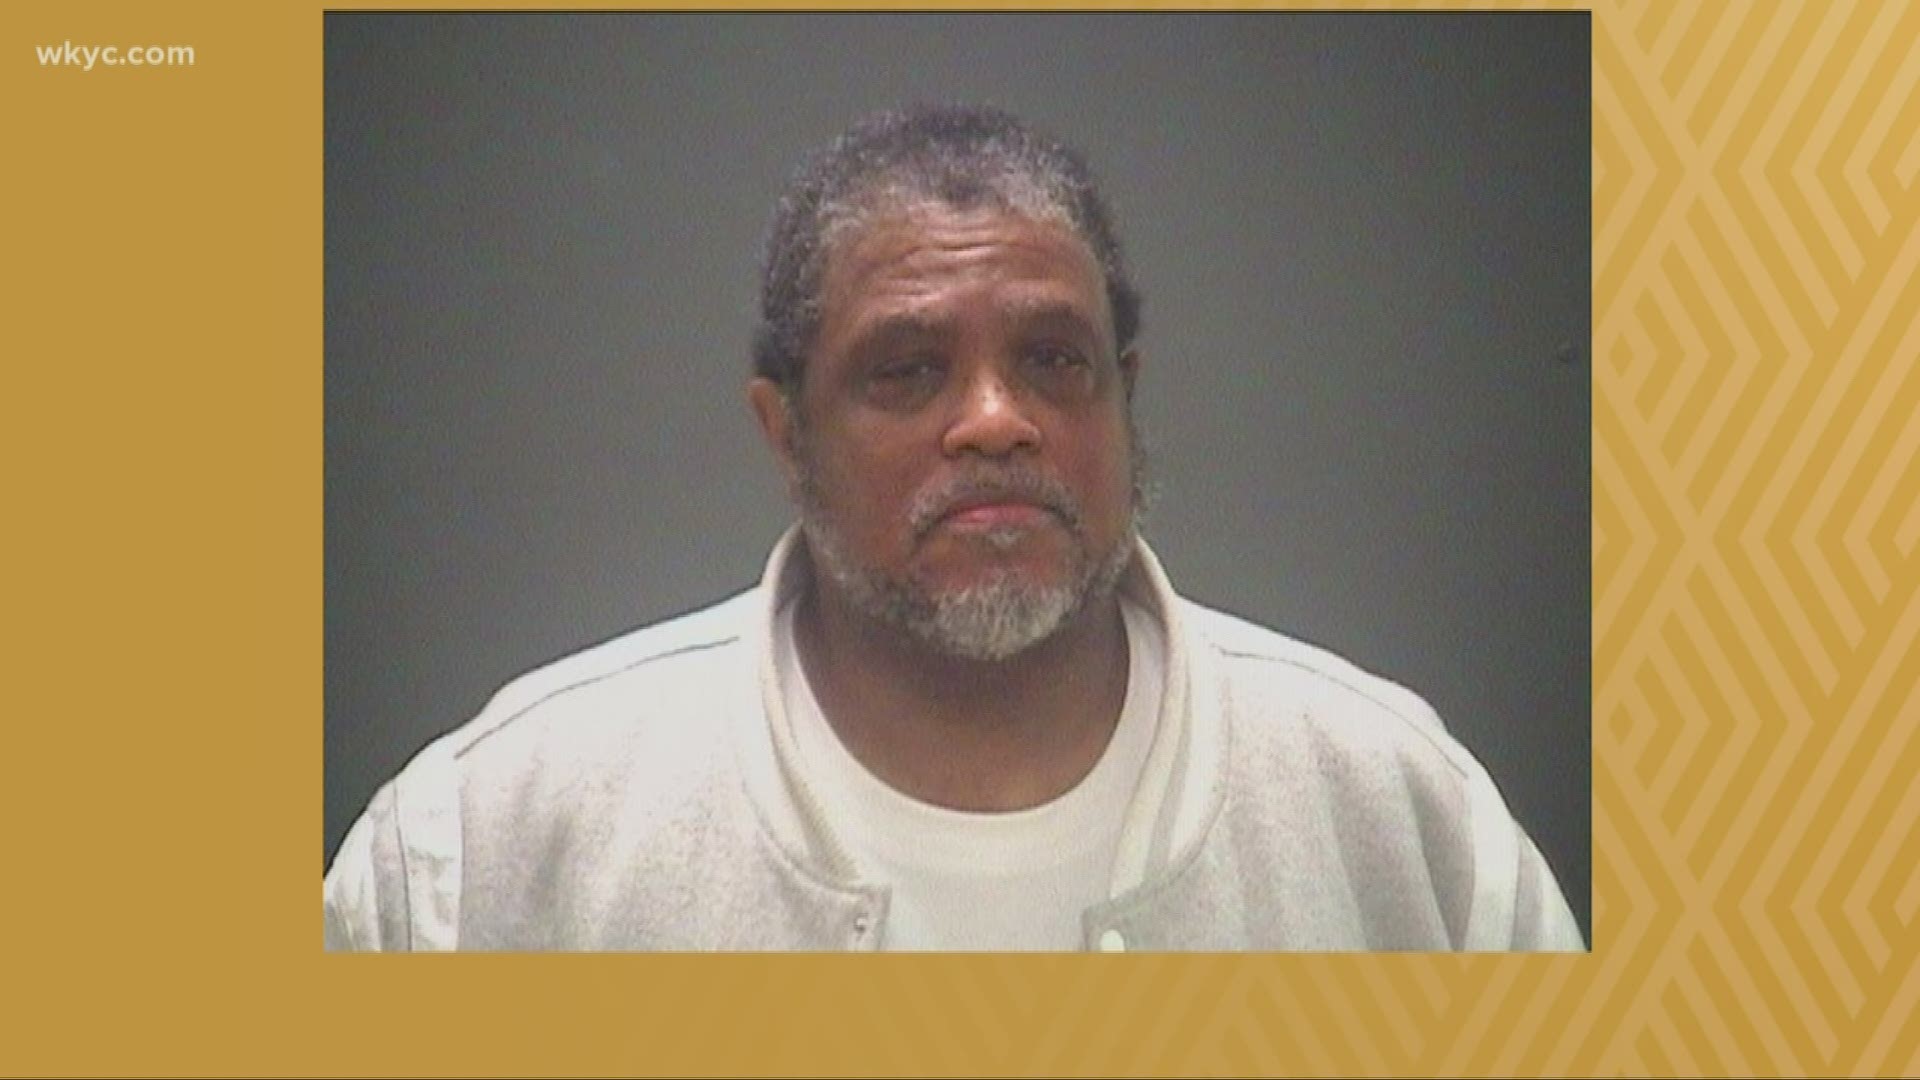 64-year-old Rev. Dr. Randolph Brown, pastor of The Inner-City Missionary Baptist Church, was charged with two counts of compelling prostitution. He is out on bond.